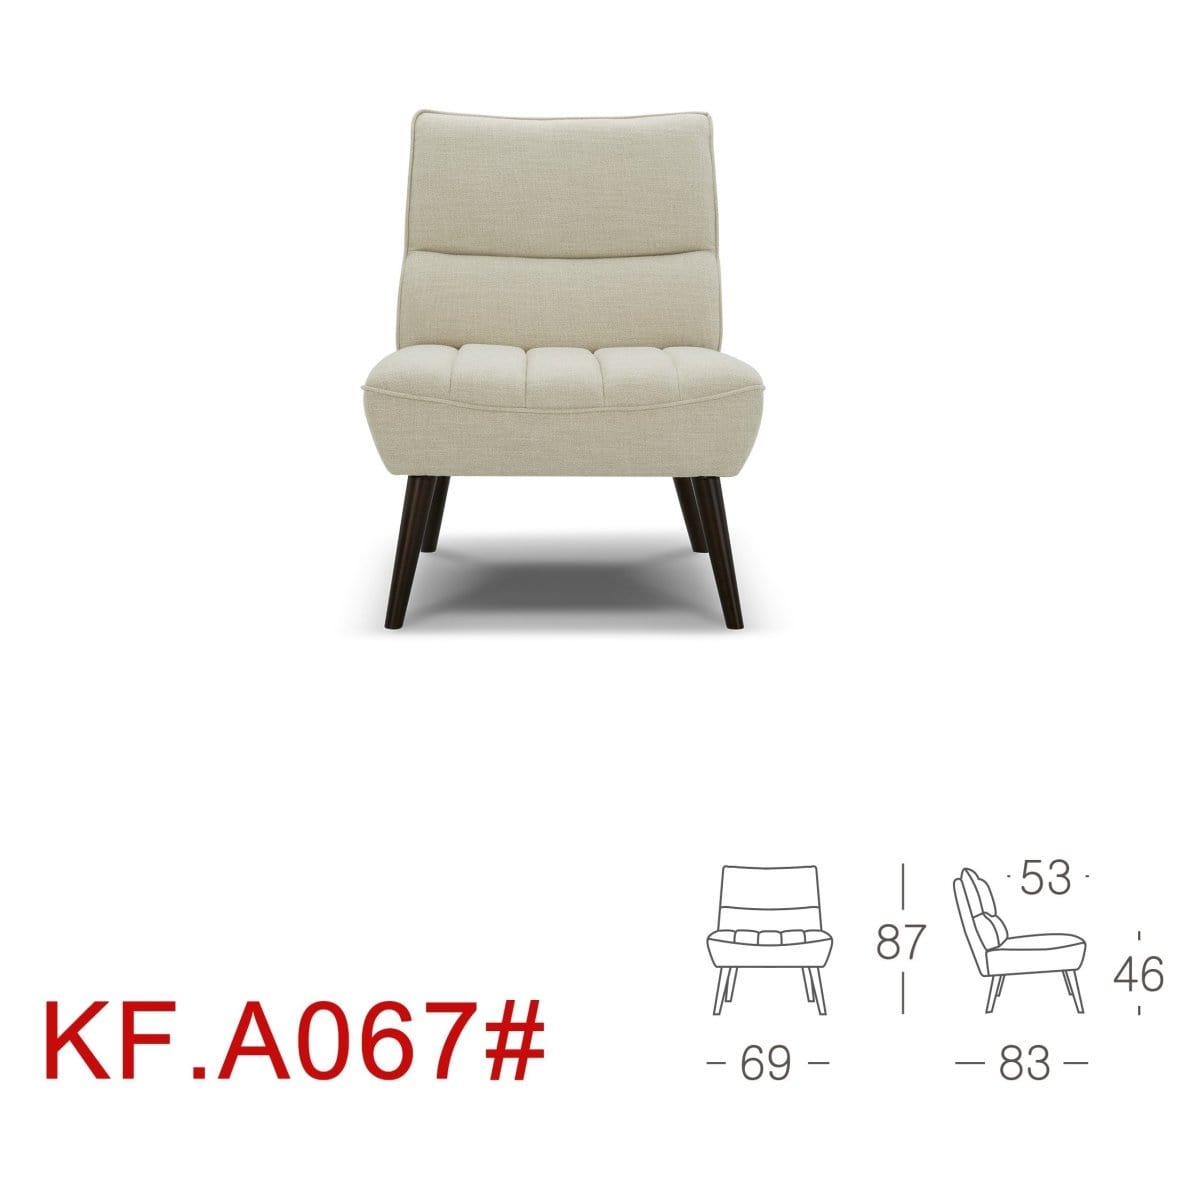 KUKA #KF.A067 Leather Lounge Chair (M Series) (I) picket and rail